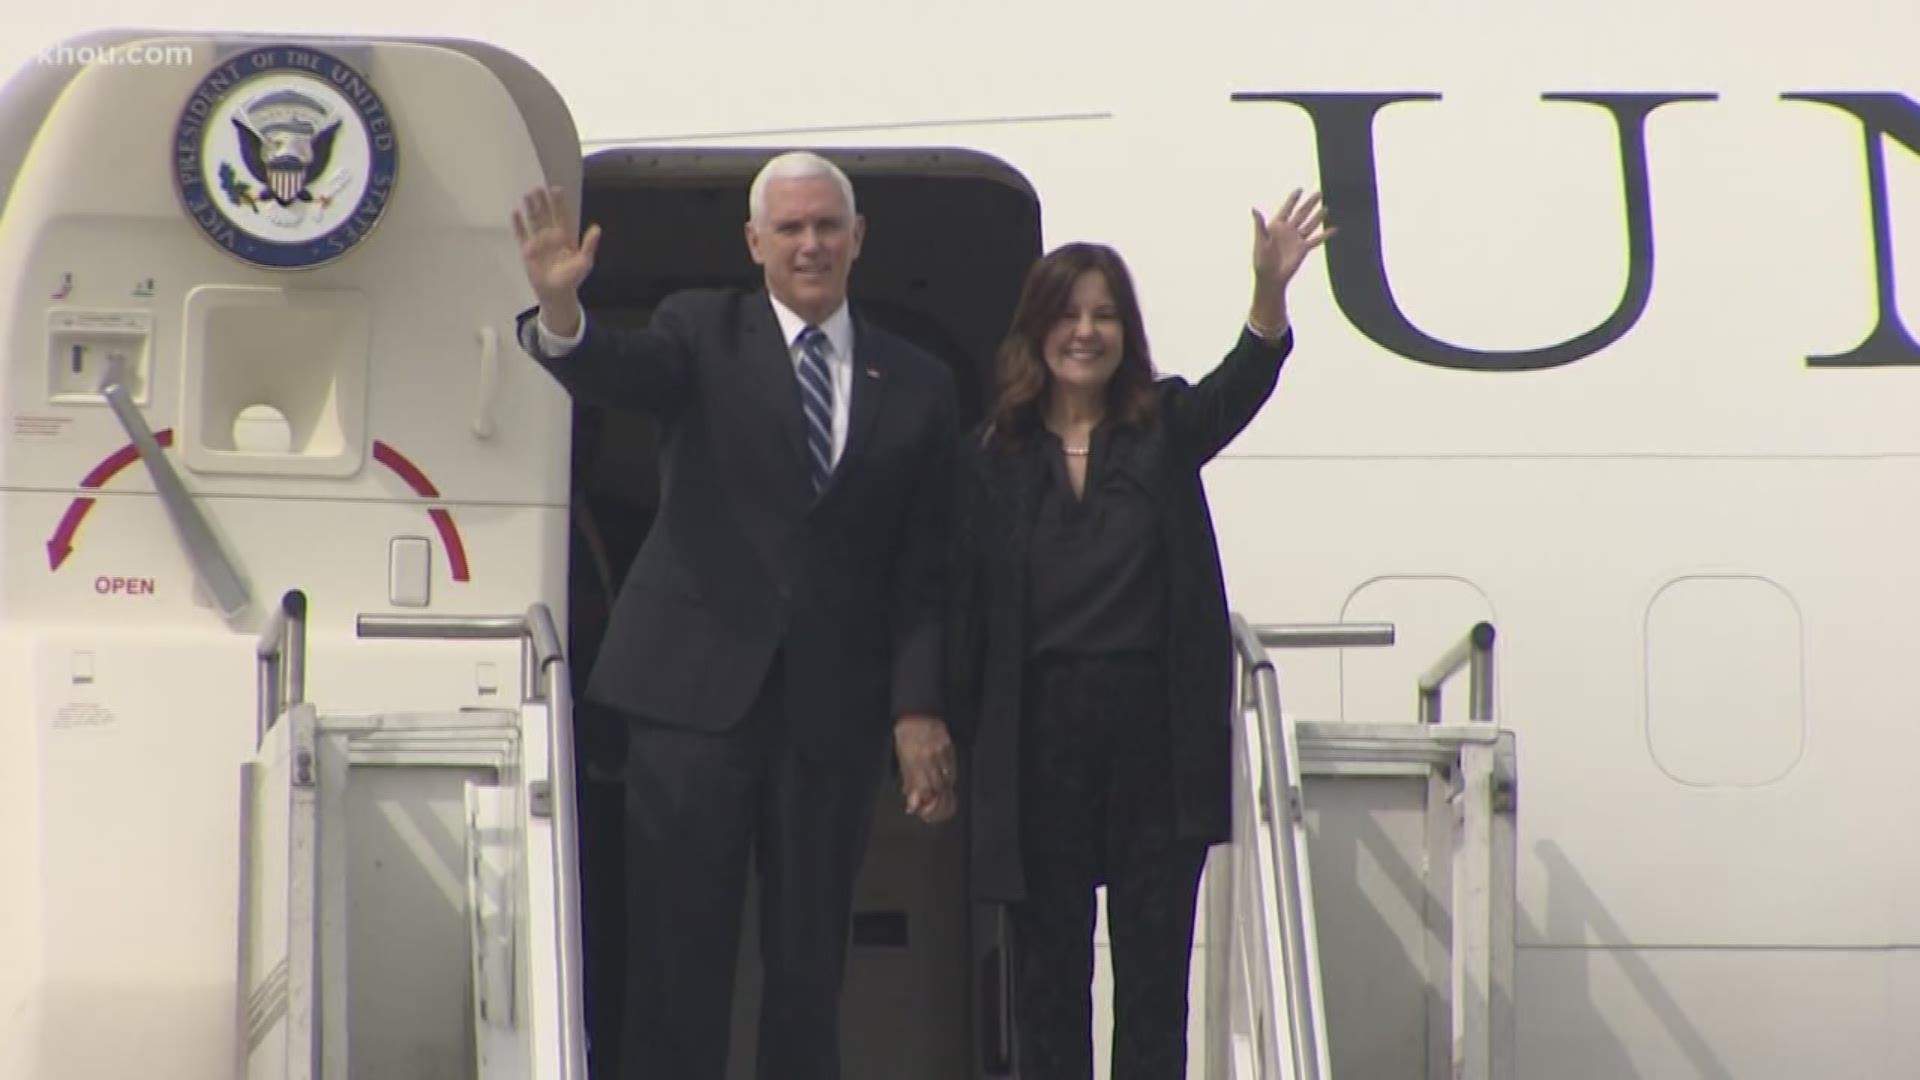 Vice President Mike Pence was in Houston on Friday talking about border security and the crisis in Venezuela.